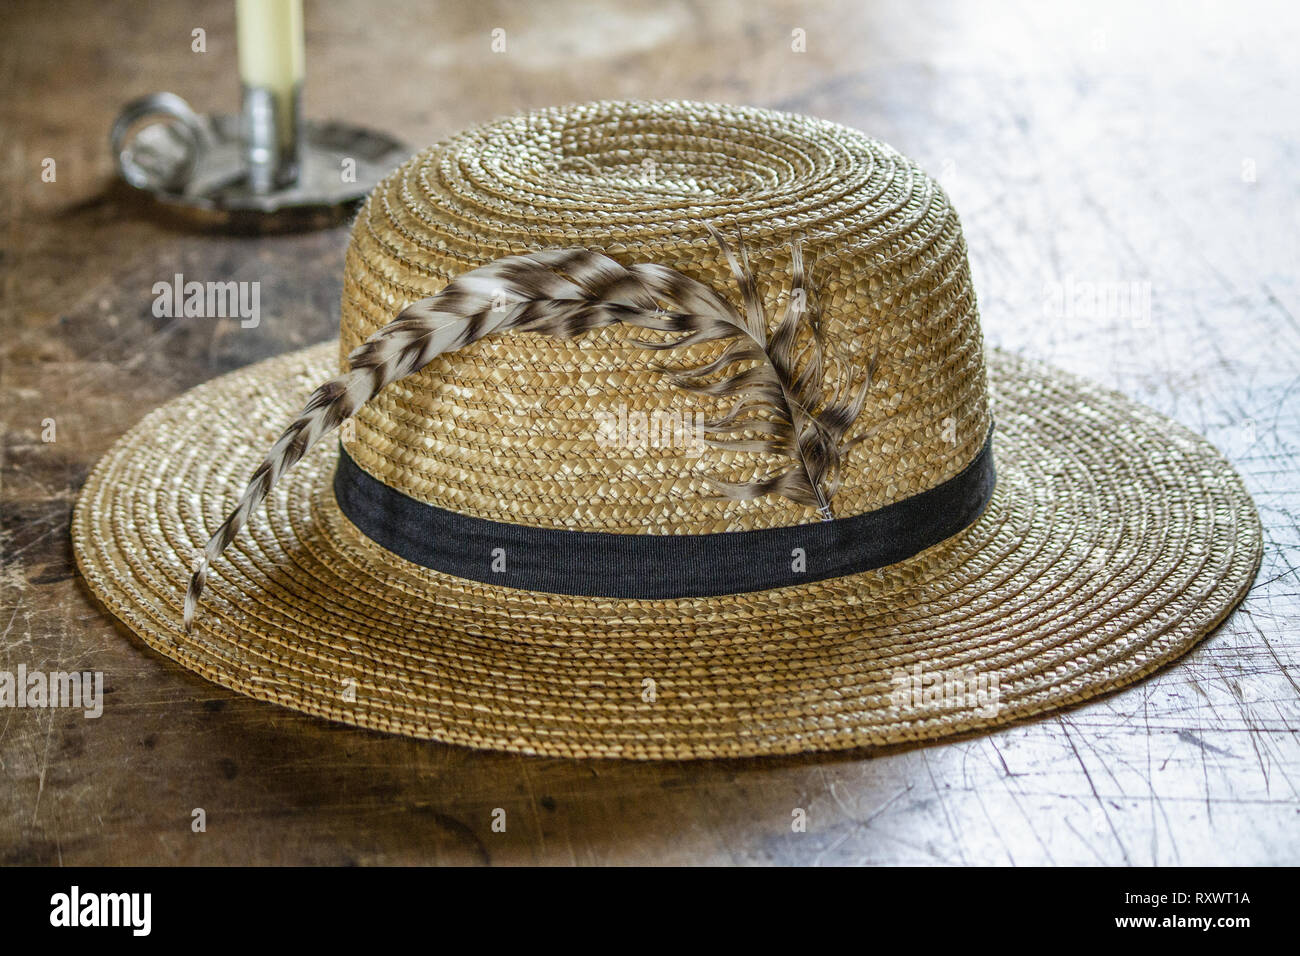 An old fashioned hat on a table Stock Photo